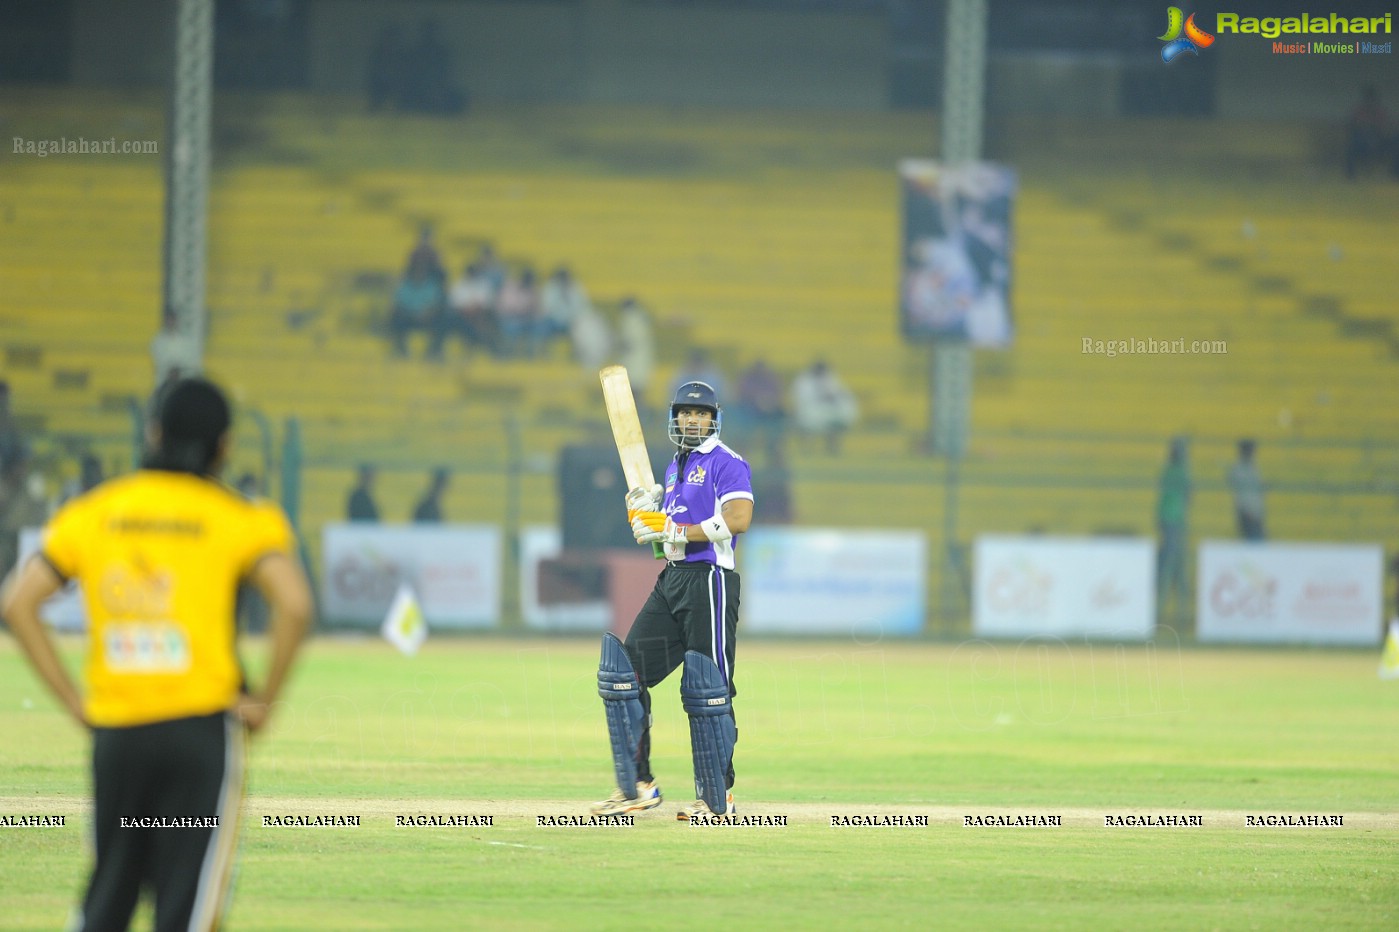 Crescent  Cricket Cup 2012 (High Resolution)